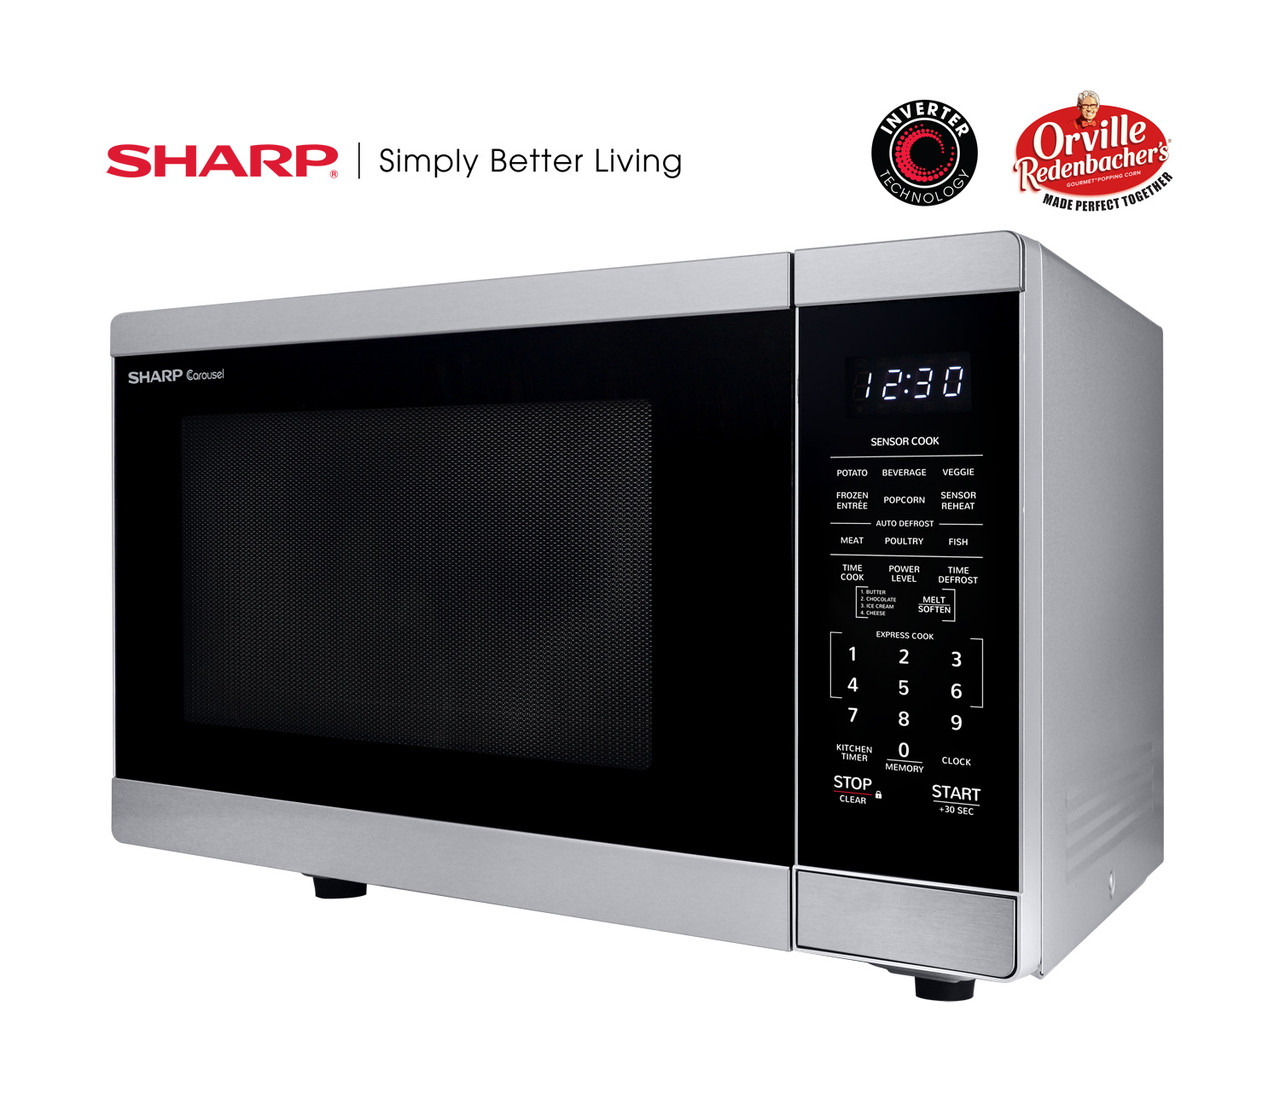 Family-Size Countertop Microwave Oven (SMC1464HS) drama